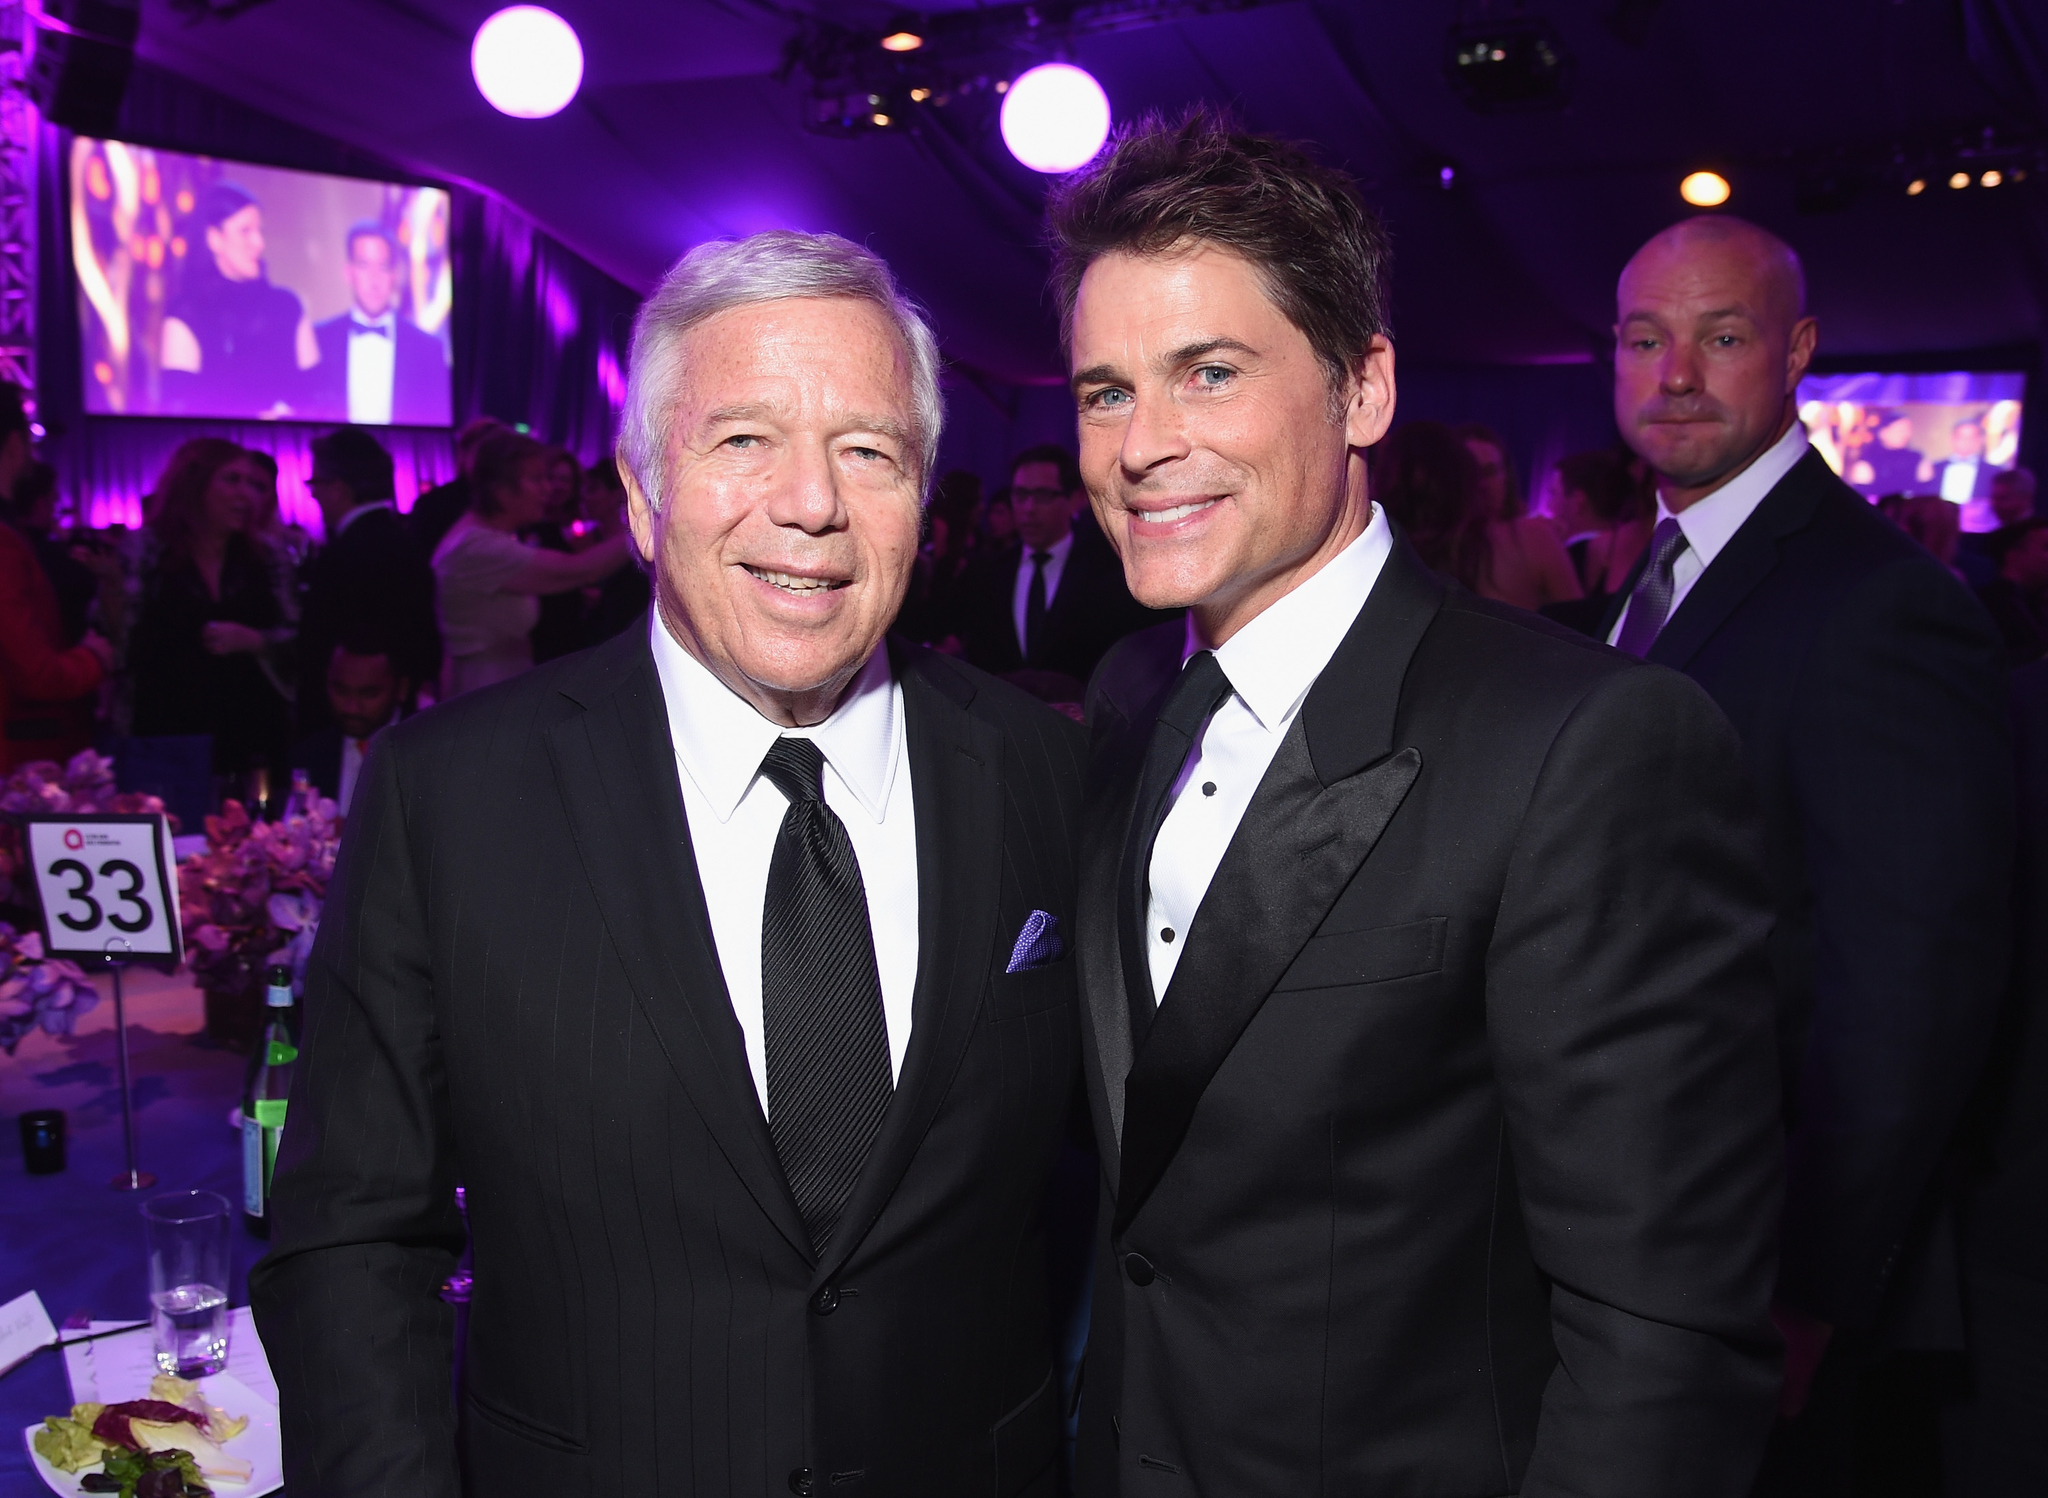 Rob Lowe and Robert Kraft at event of The Oscars (2015)